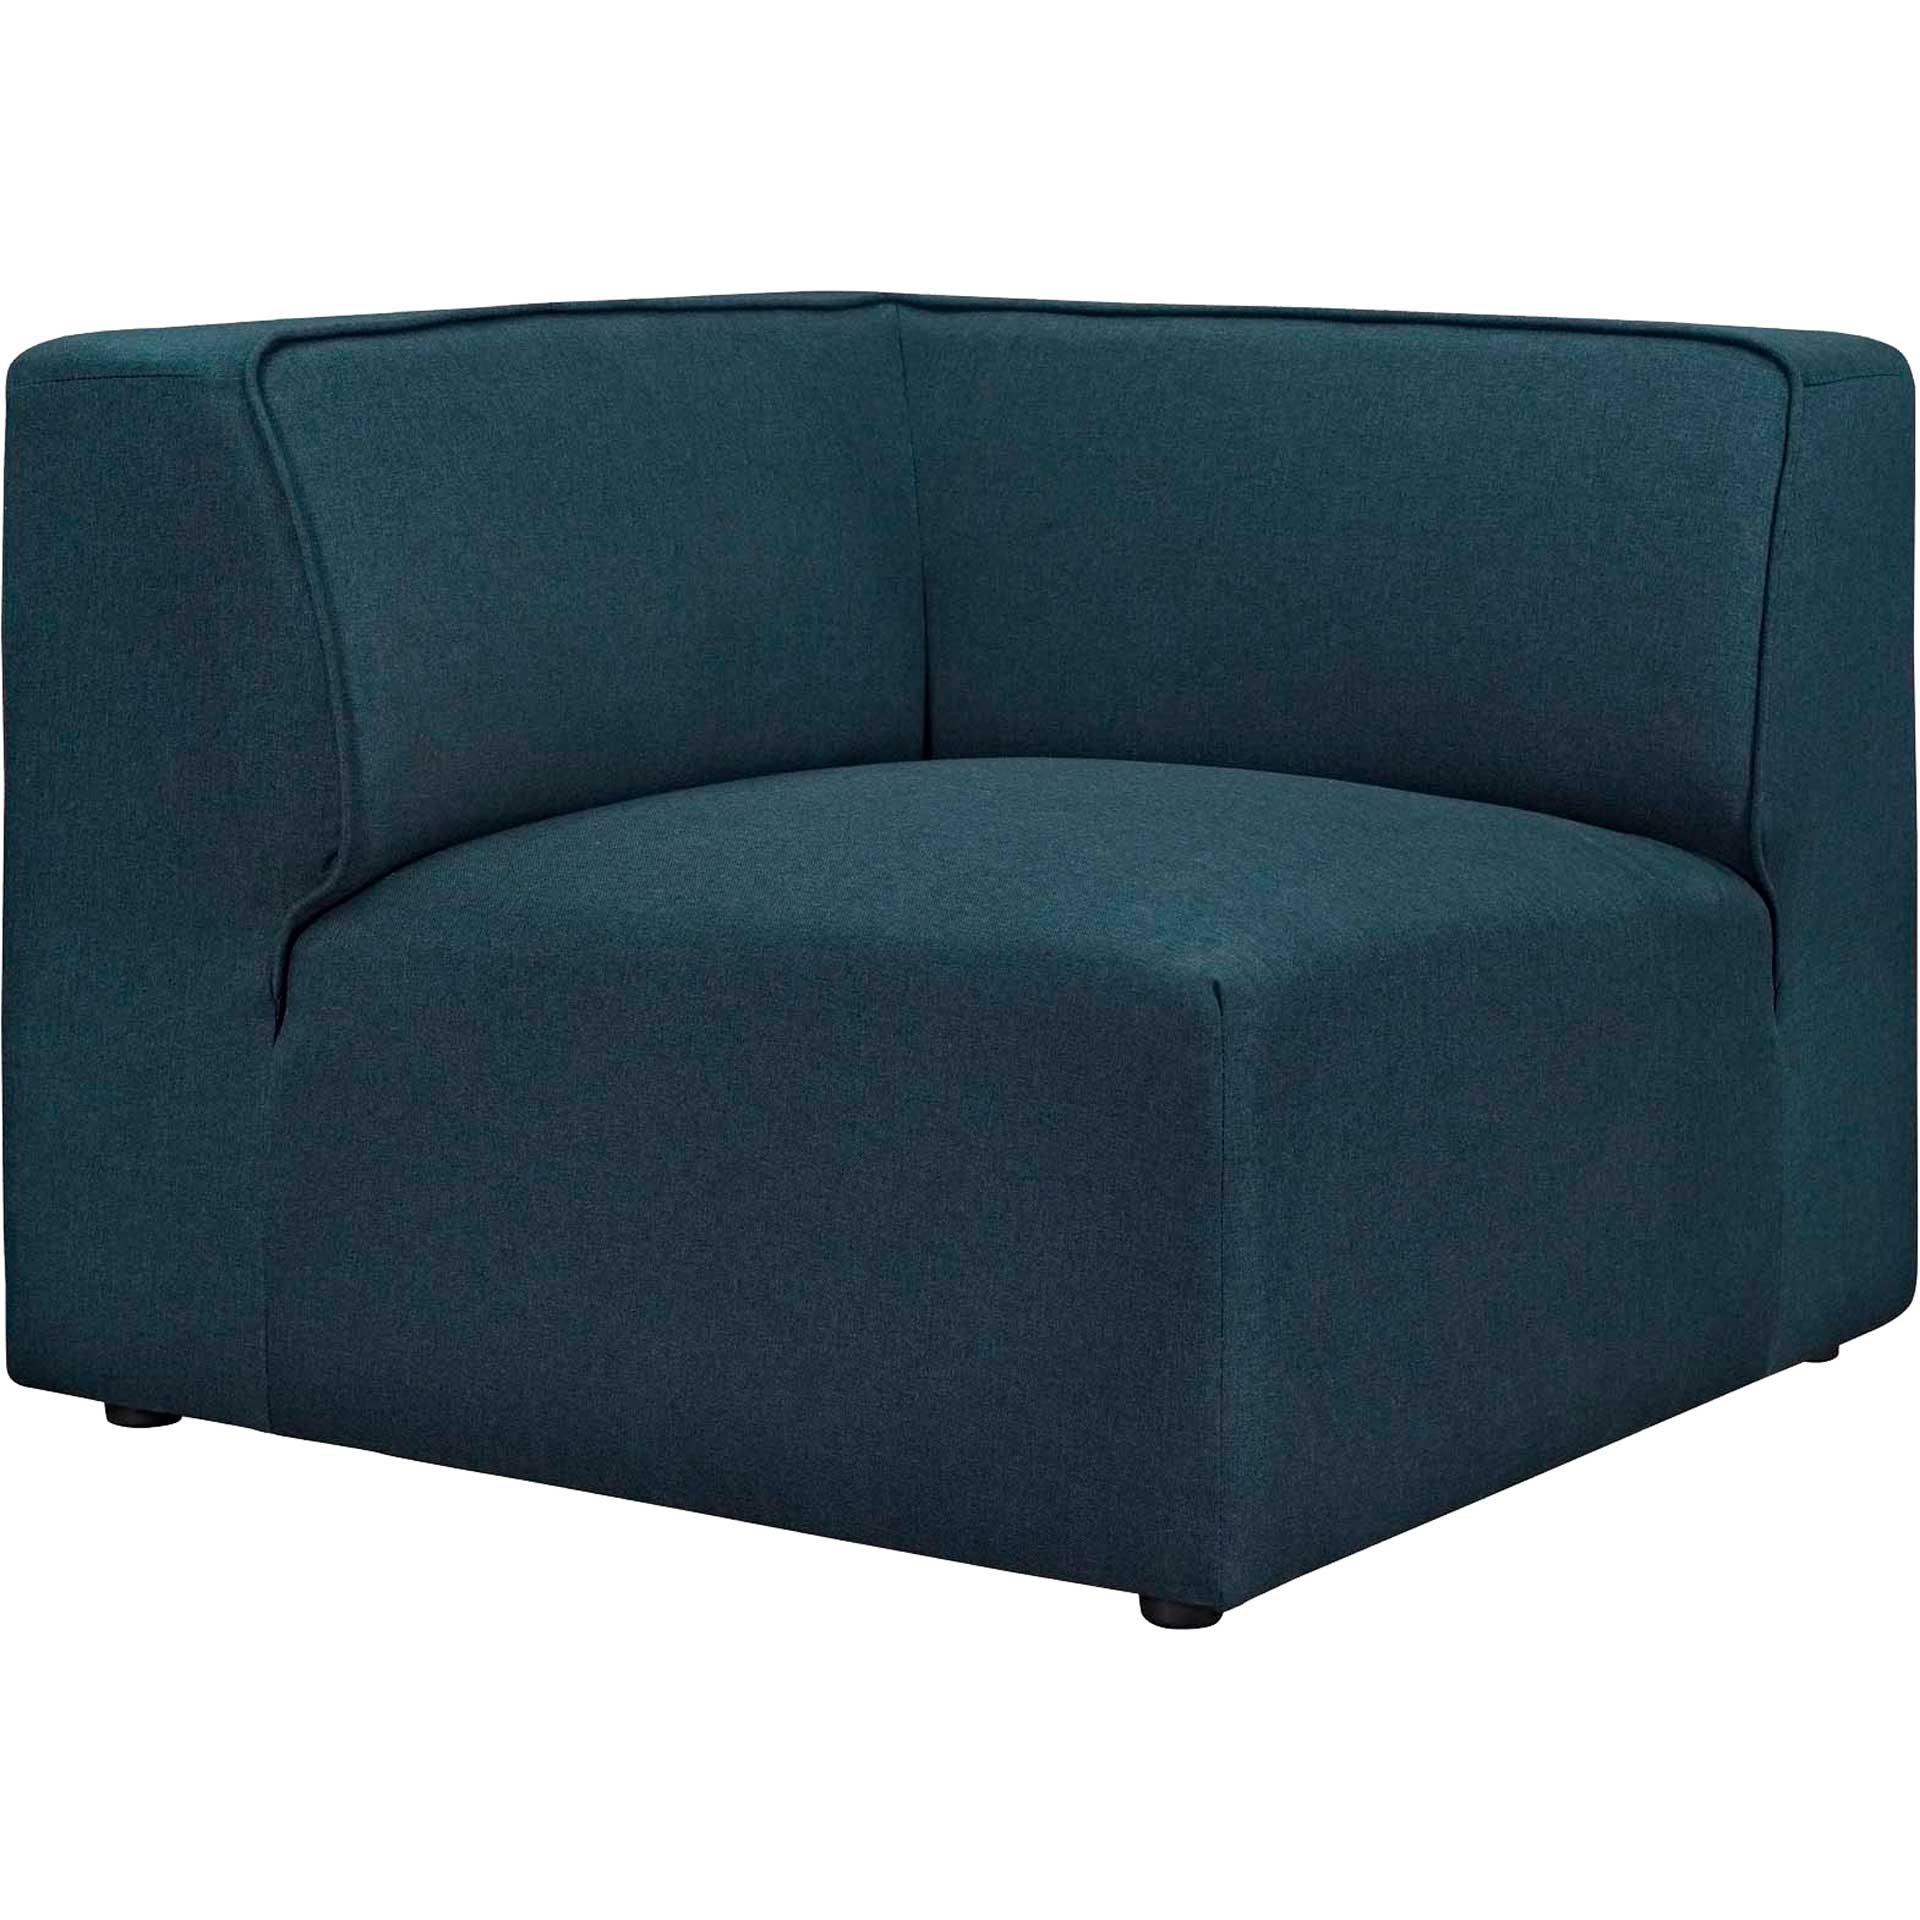 Maisie 5 Piece L-Shaped Armless Sectional Sofa Blue